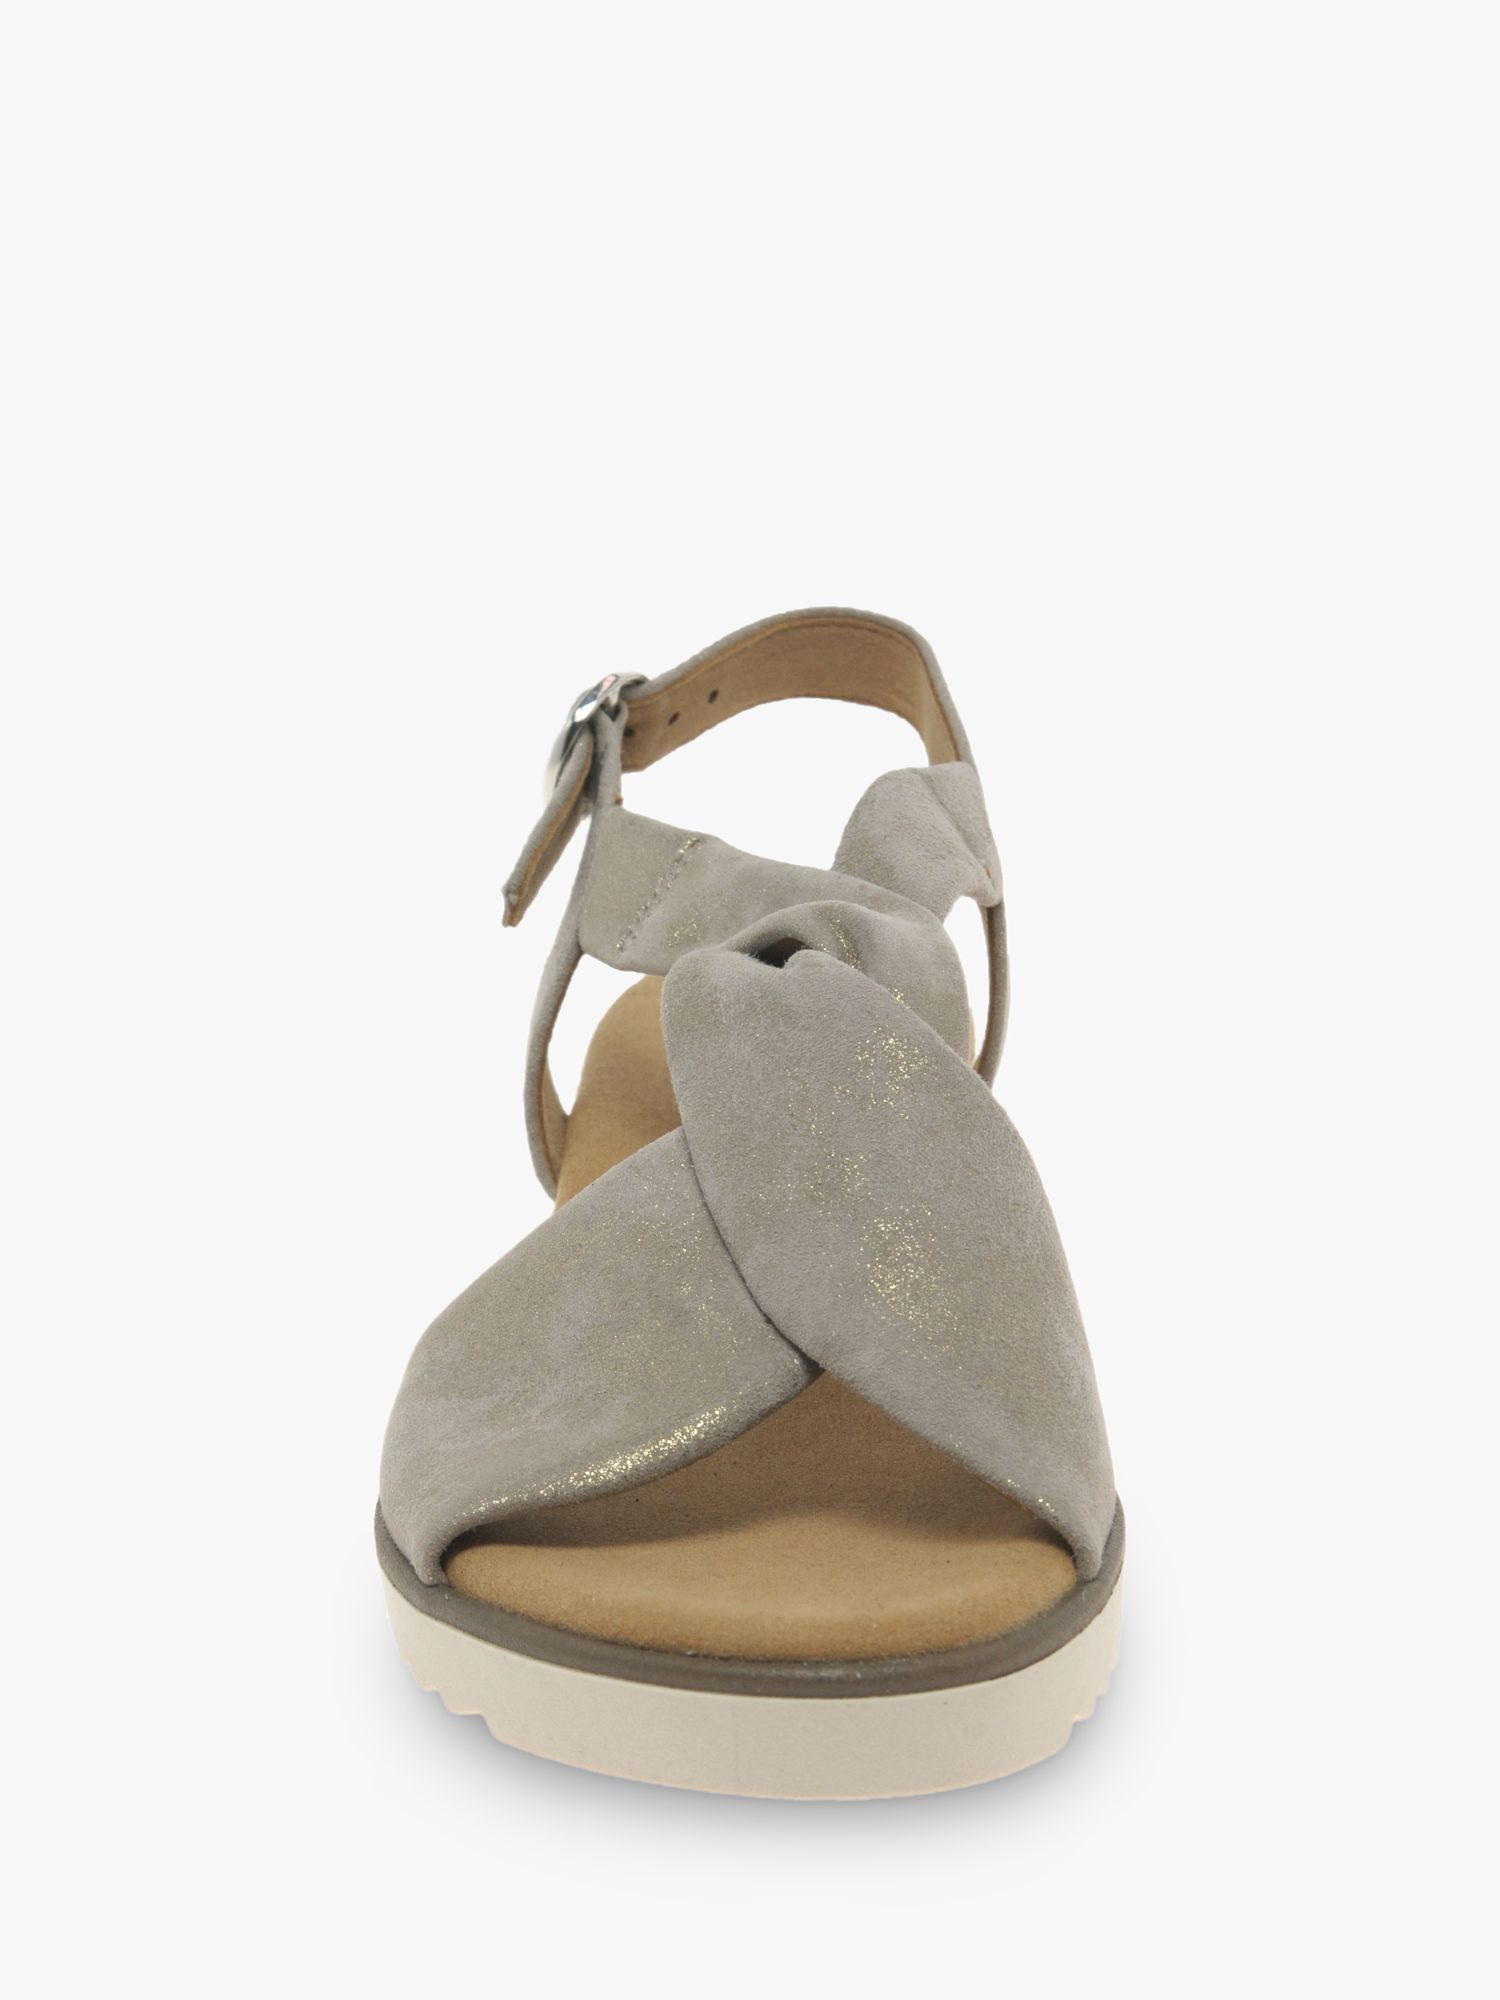 Gabor Wide Leather Wedge Heel Sandals, Neutral at John Lewis & Partners